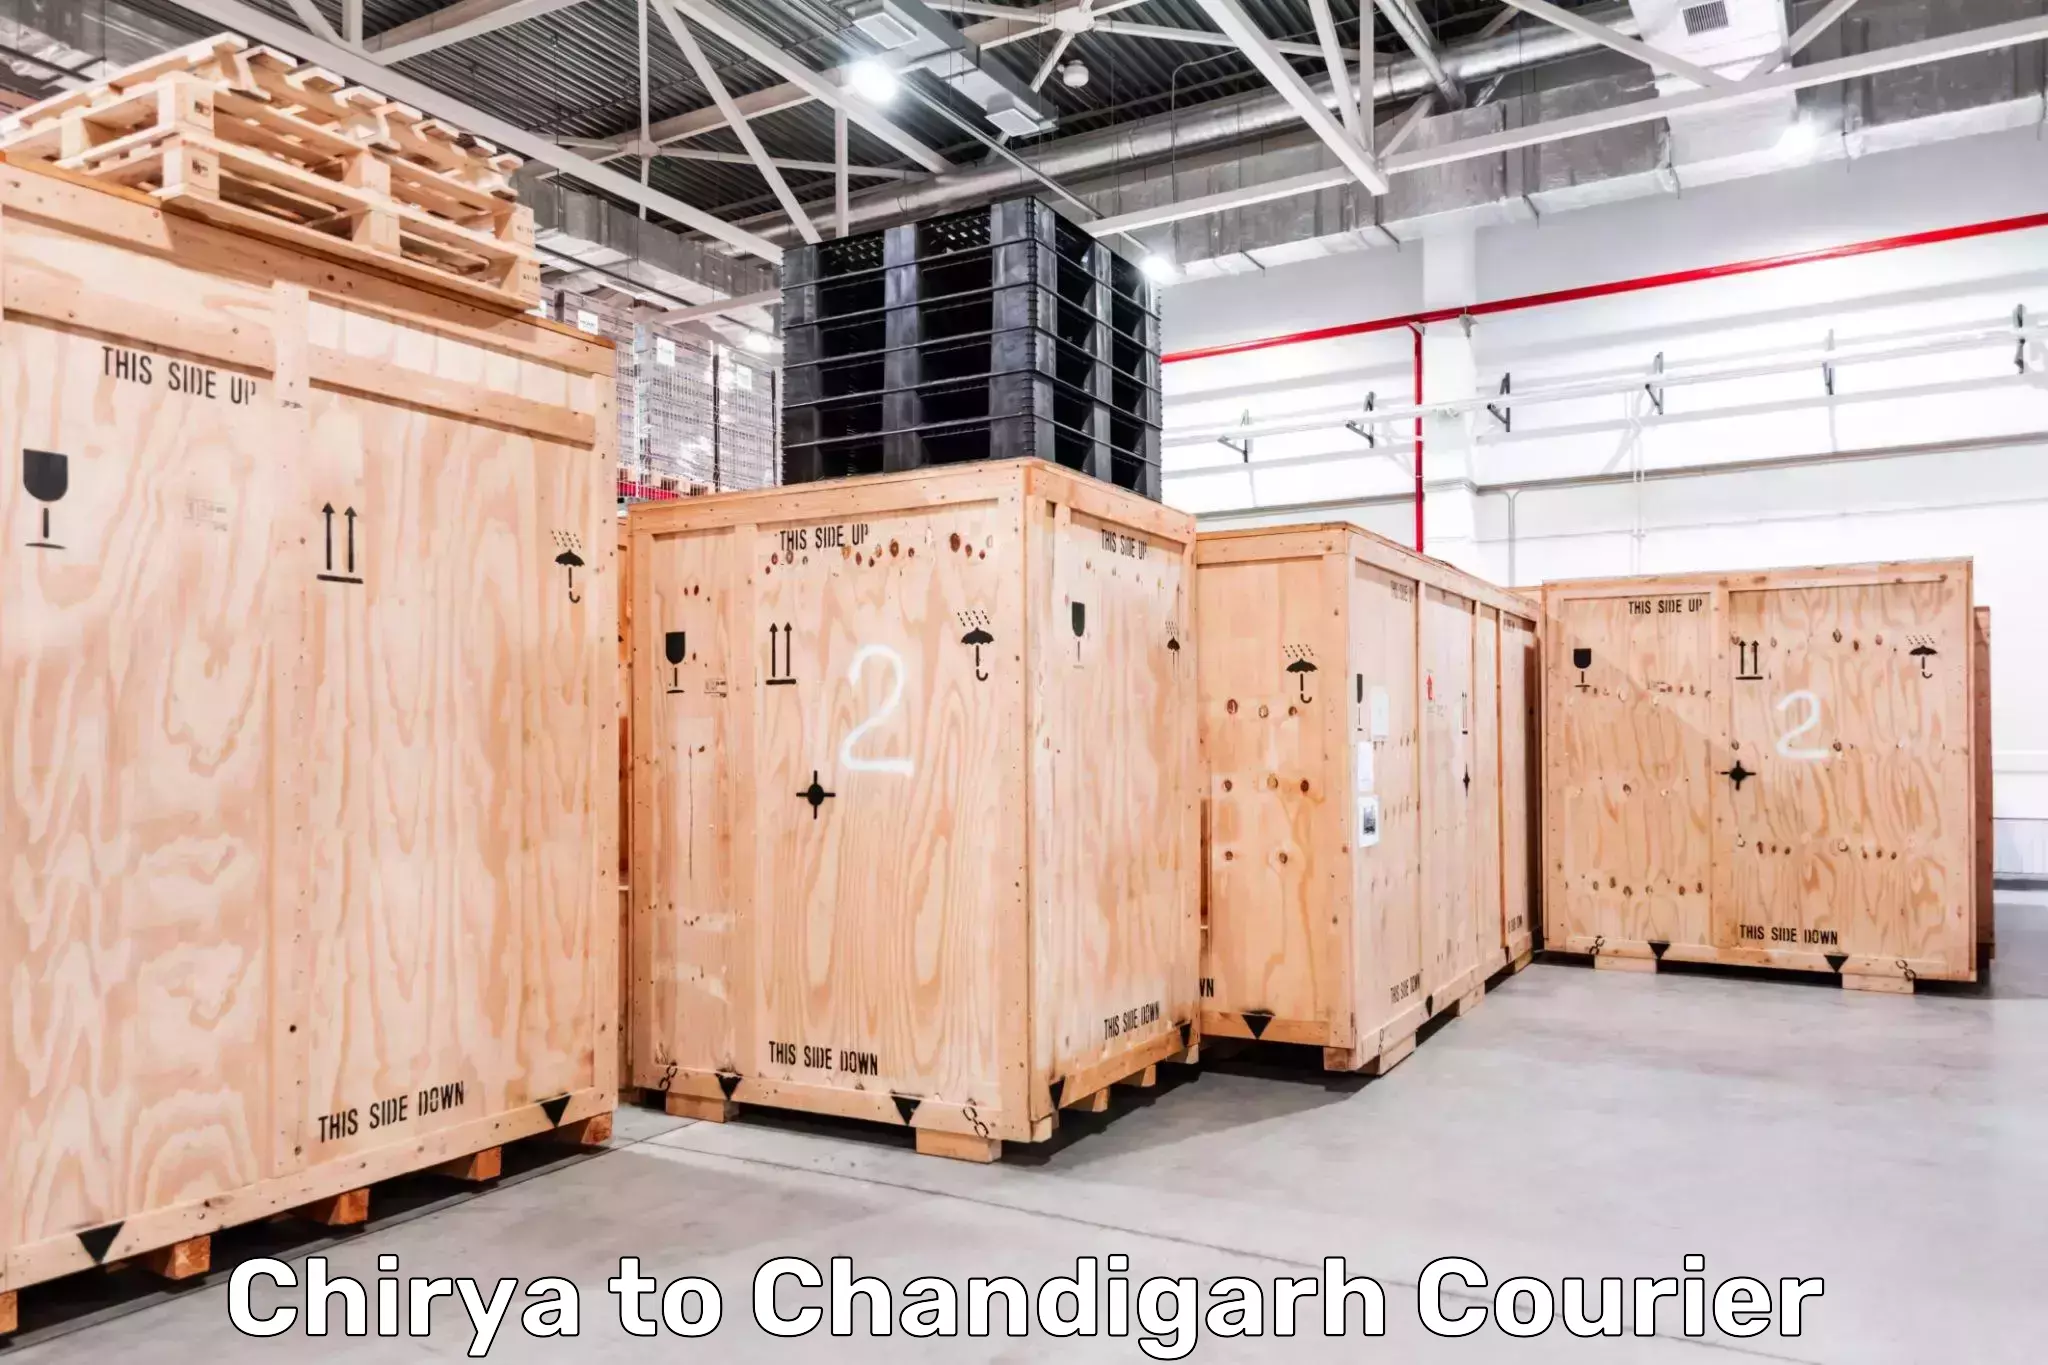 Cash on delivery service Chirya to Chandigarh